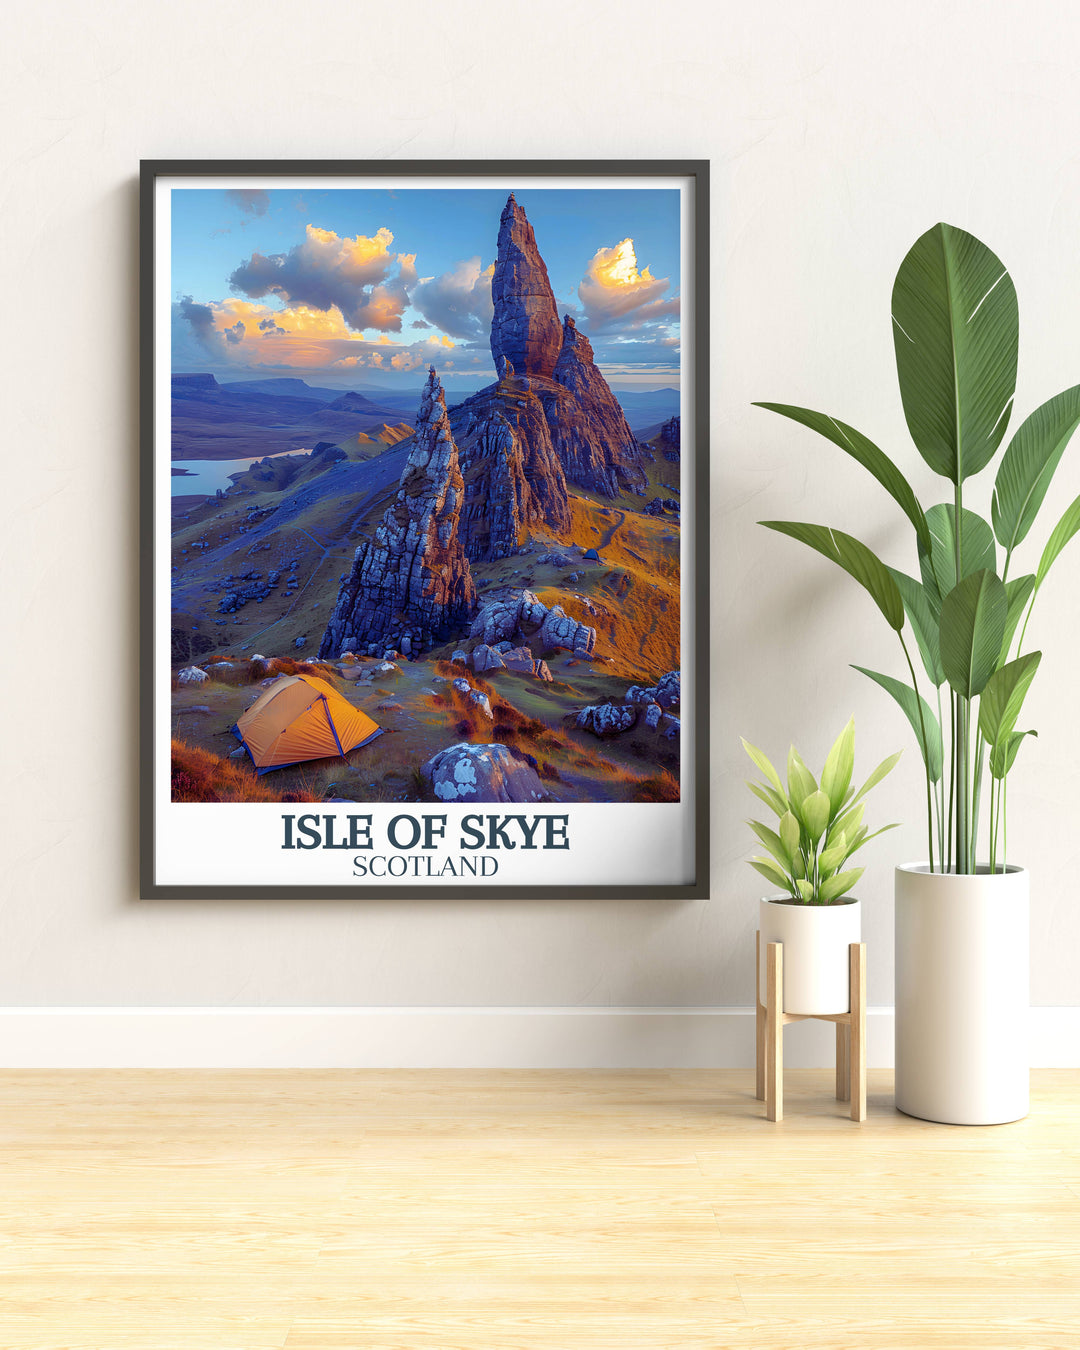 Stunning Isle of Skye Art print, vividly portraying the iconic Scottish cliffs and coastline, enhancing any travel-themed gallery